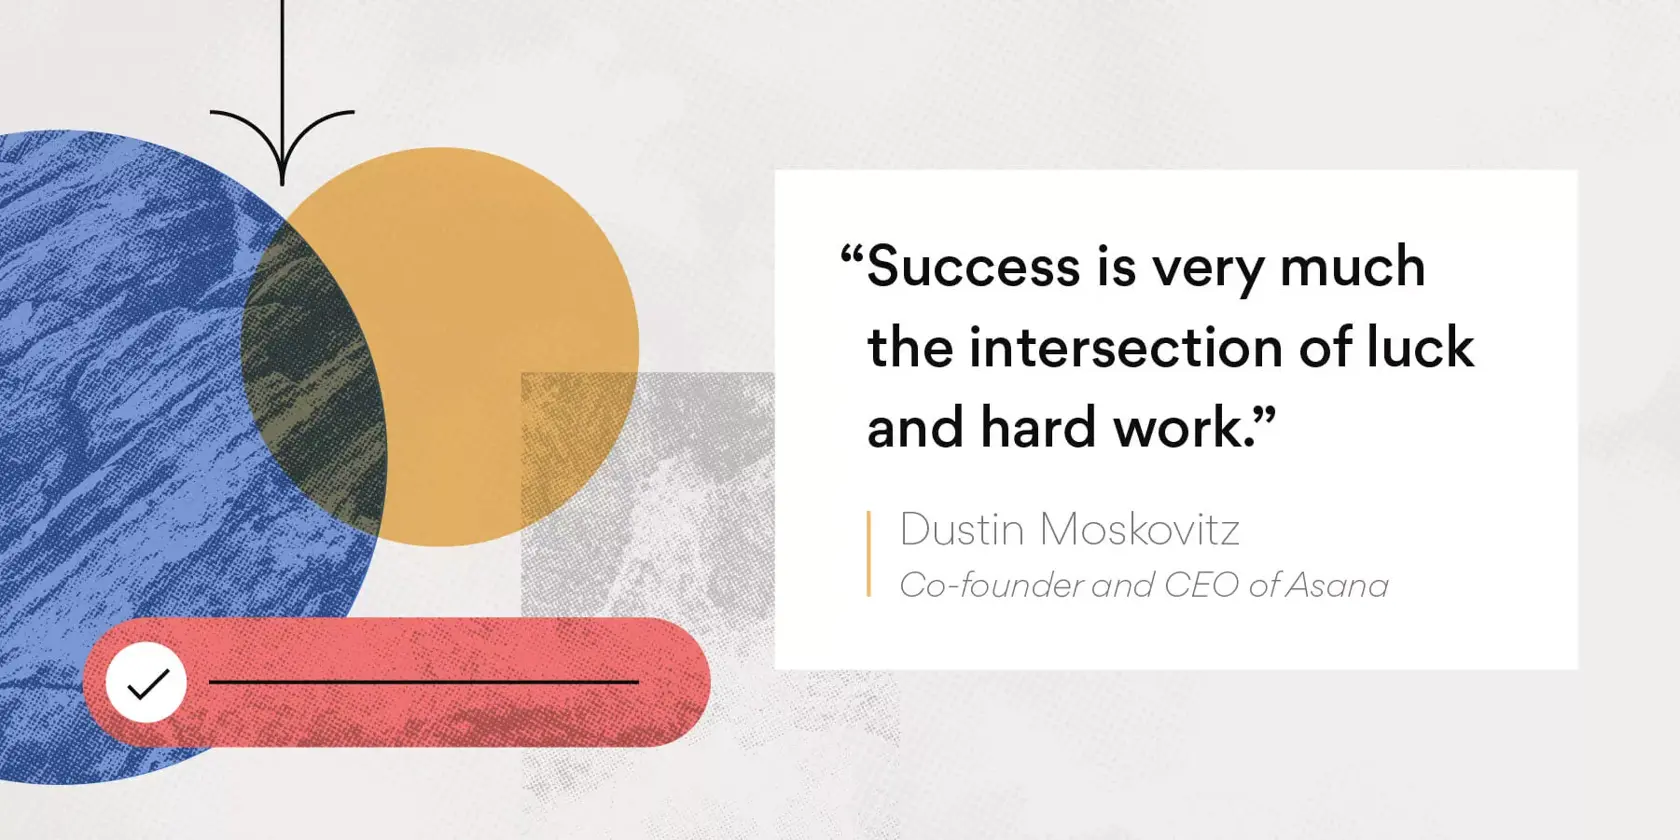 [Inline illustration] Team motivational quotes image quote from Dustin Moskovitz (abstract)